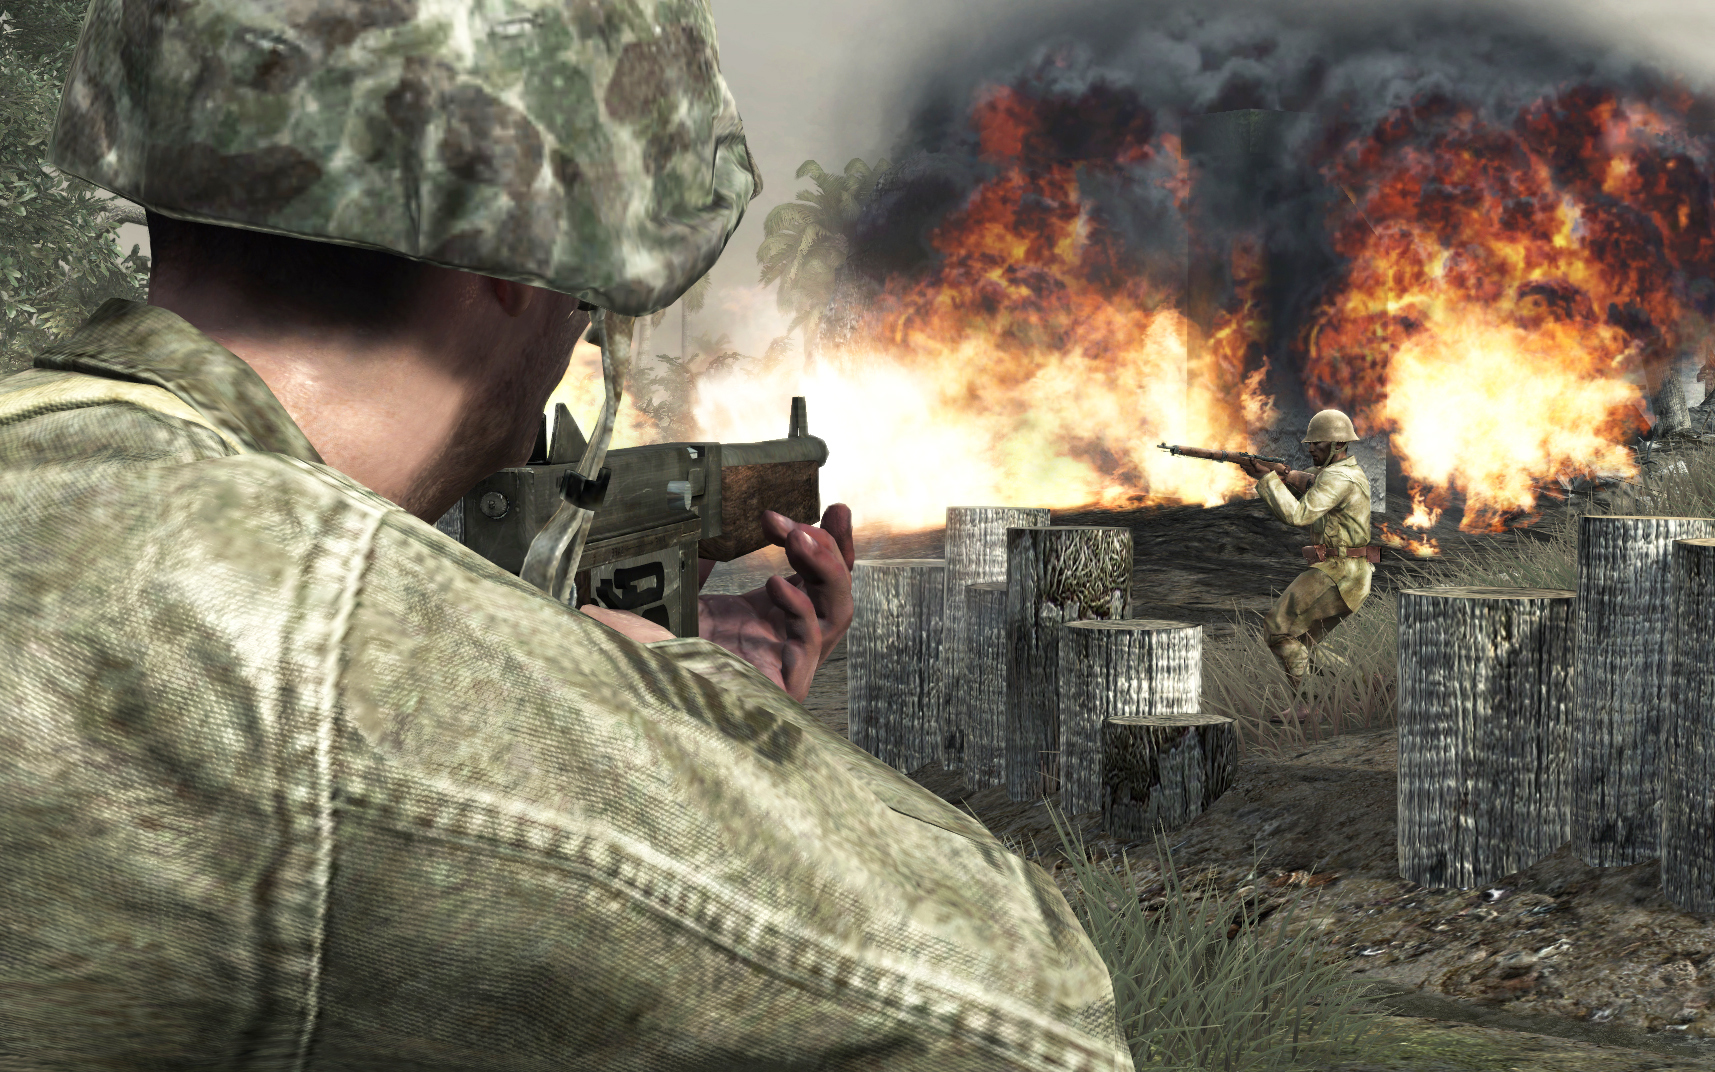 call of duty waw pc re